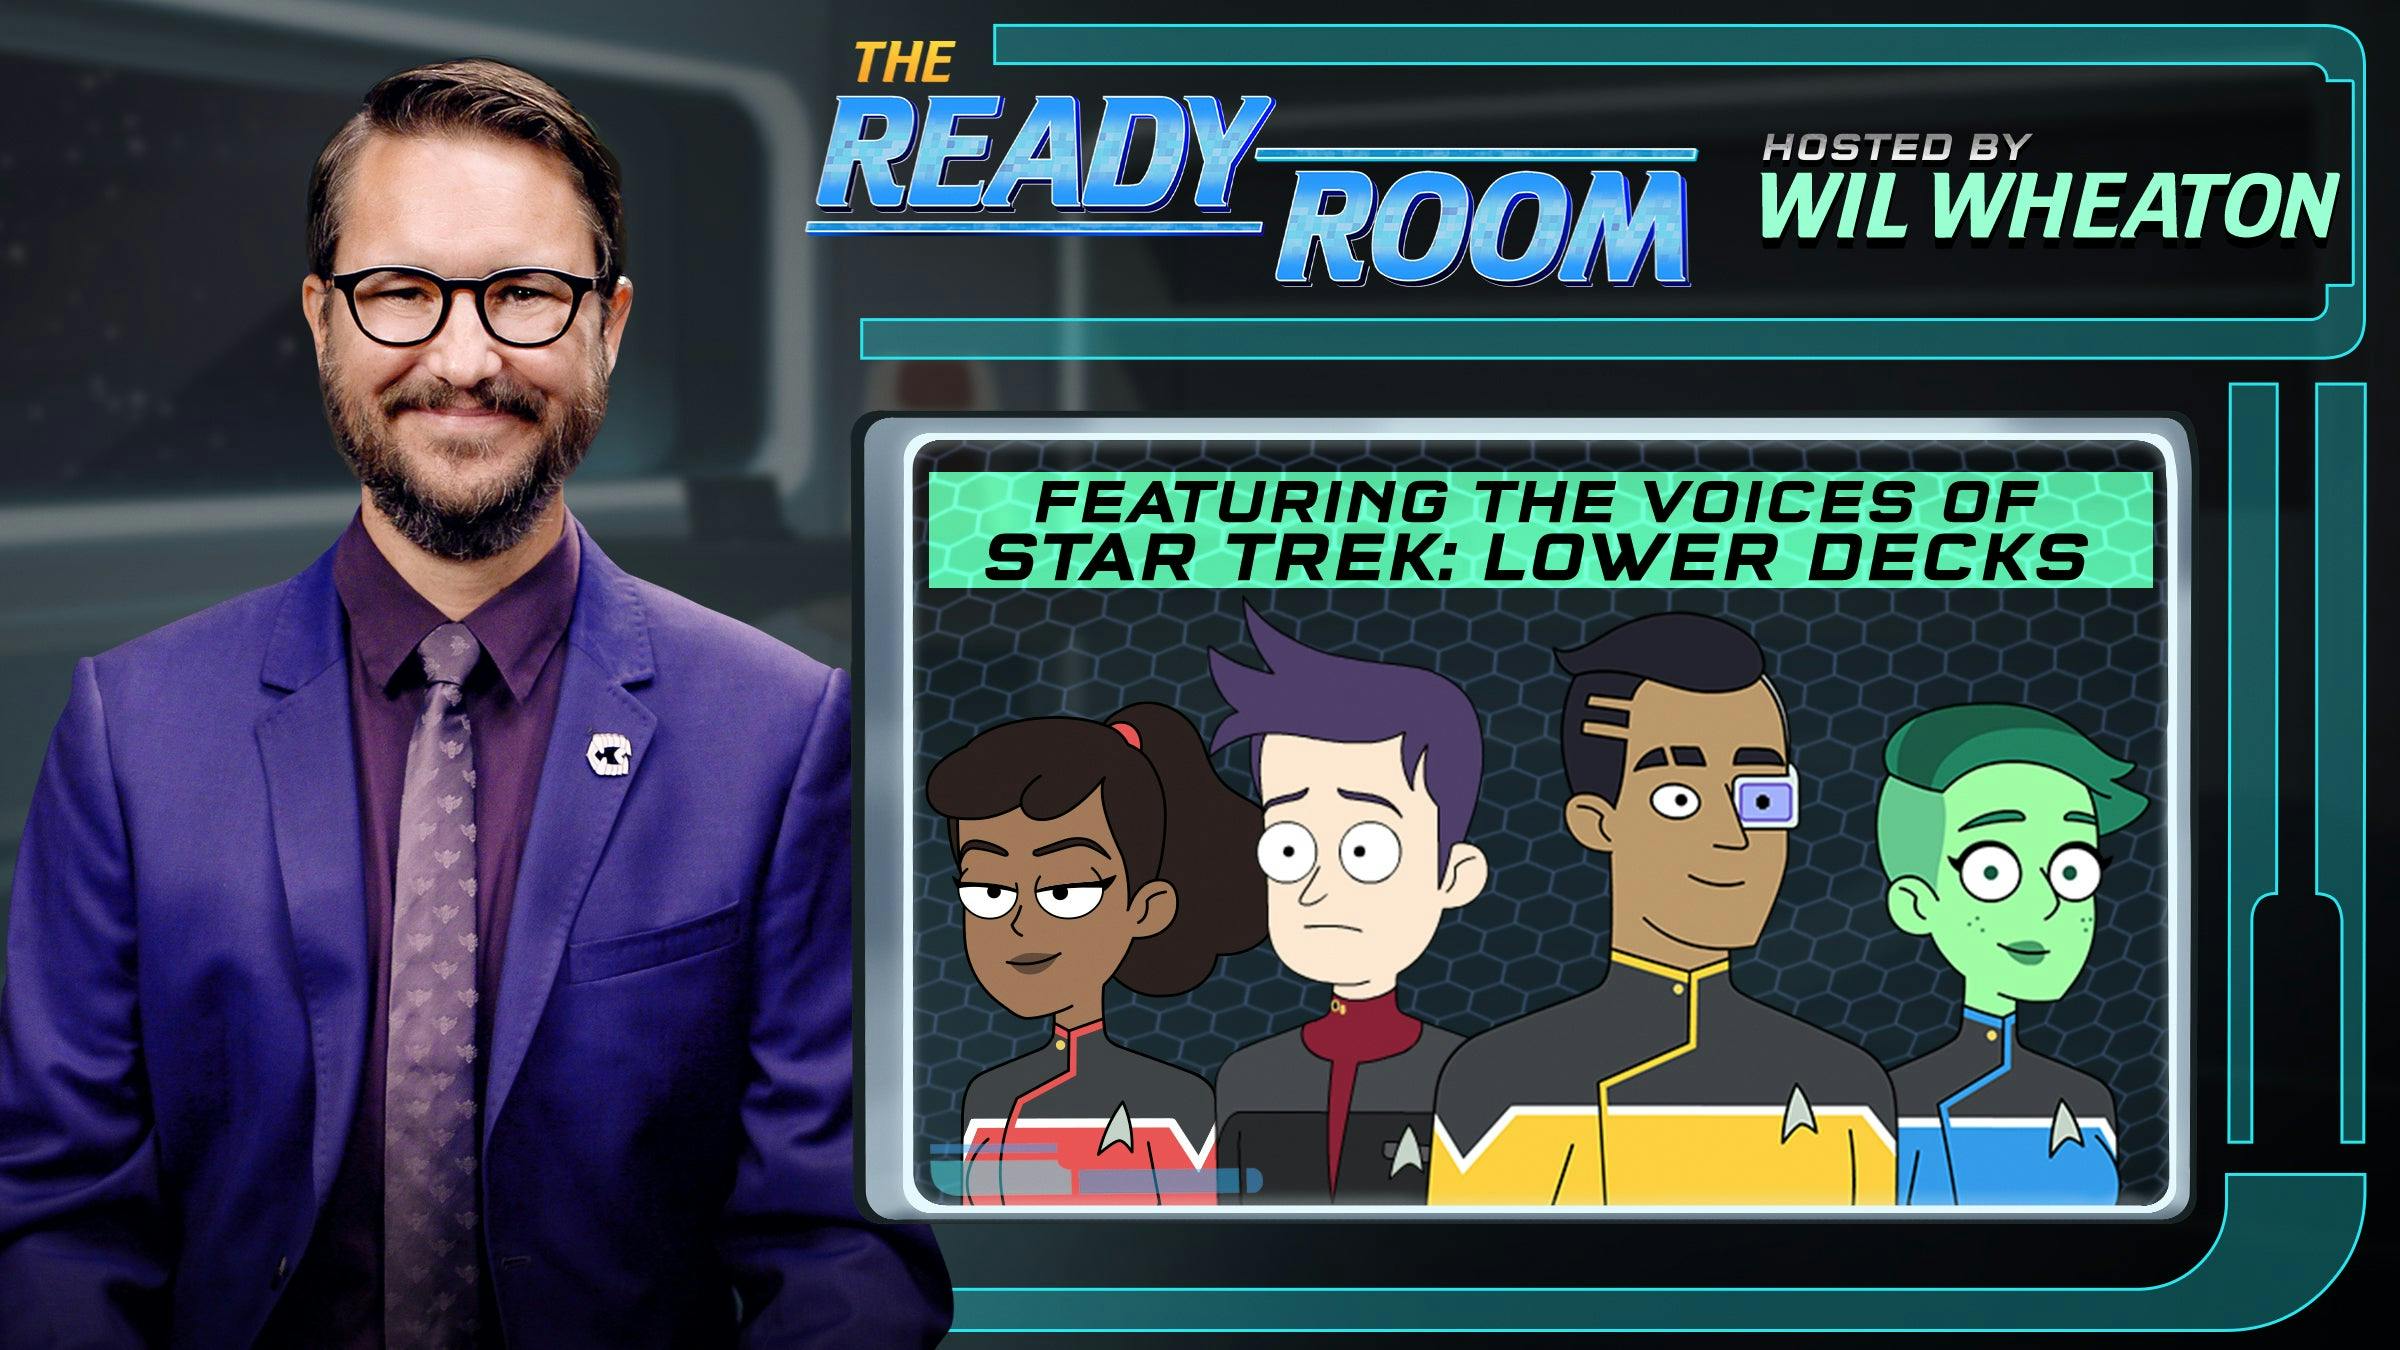 The creator and main cast of Star Trek: Lower Decks join Wil Wheaton in the Ready Room